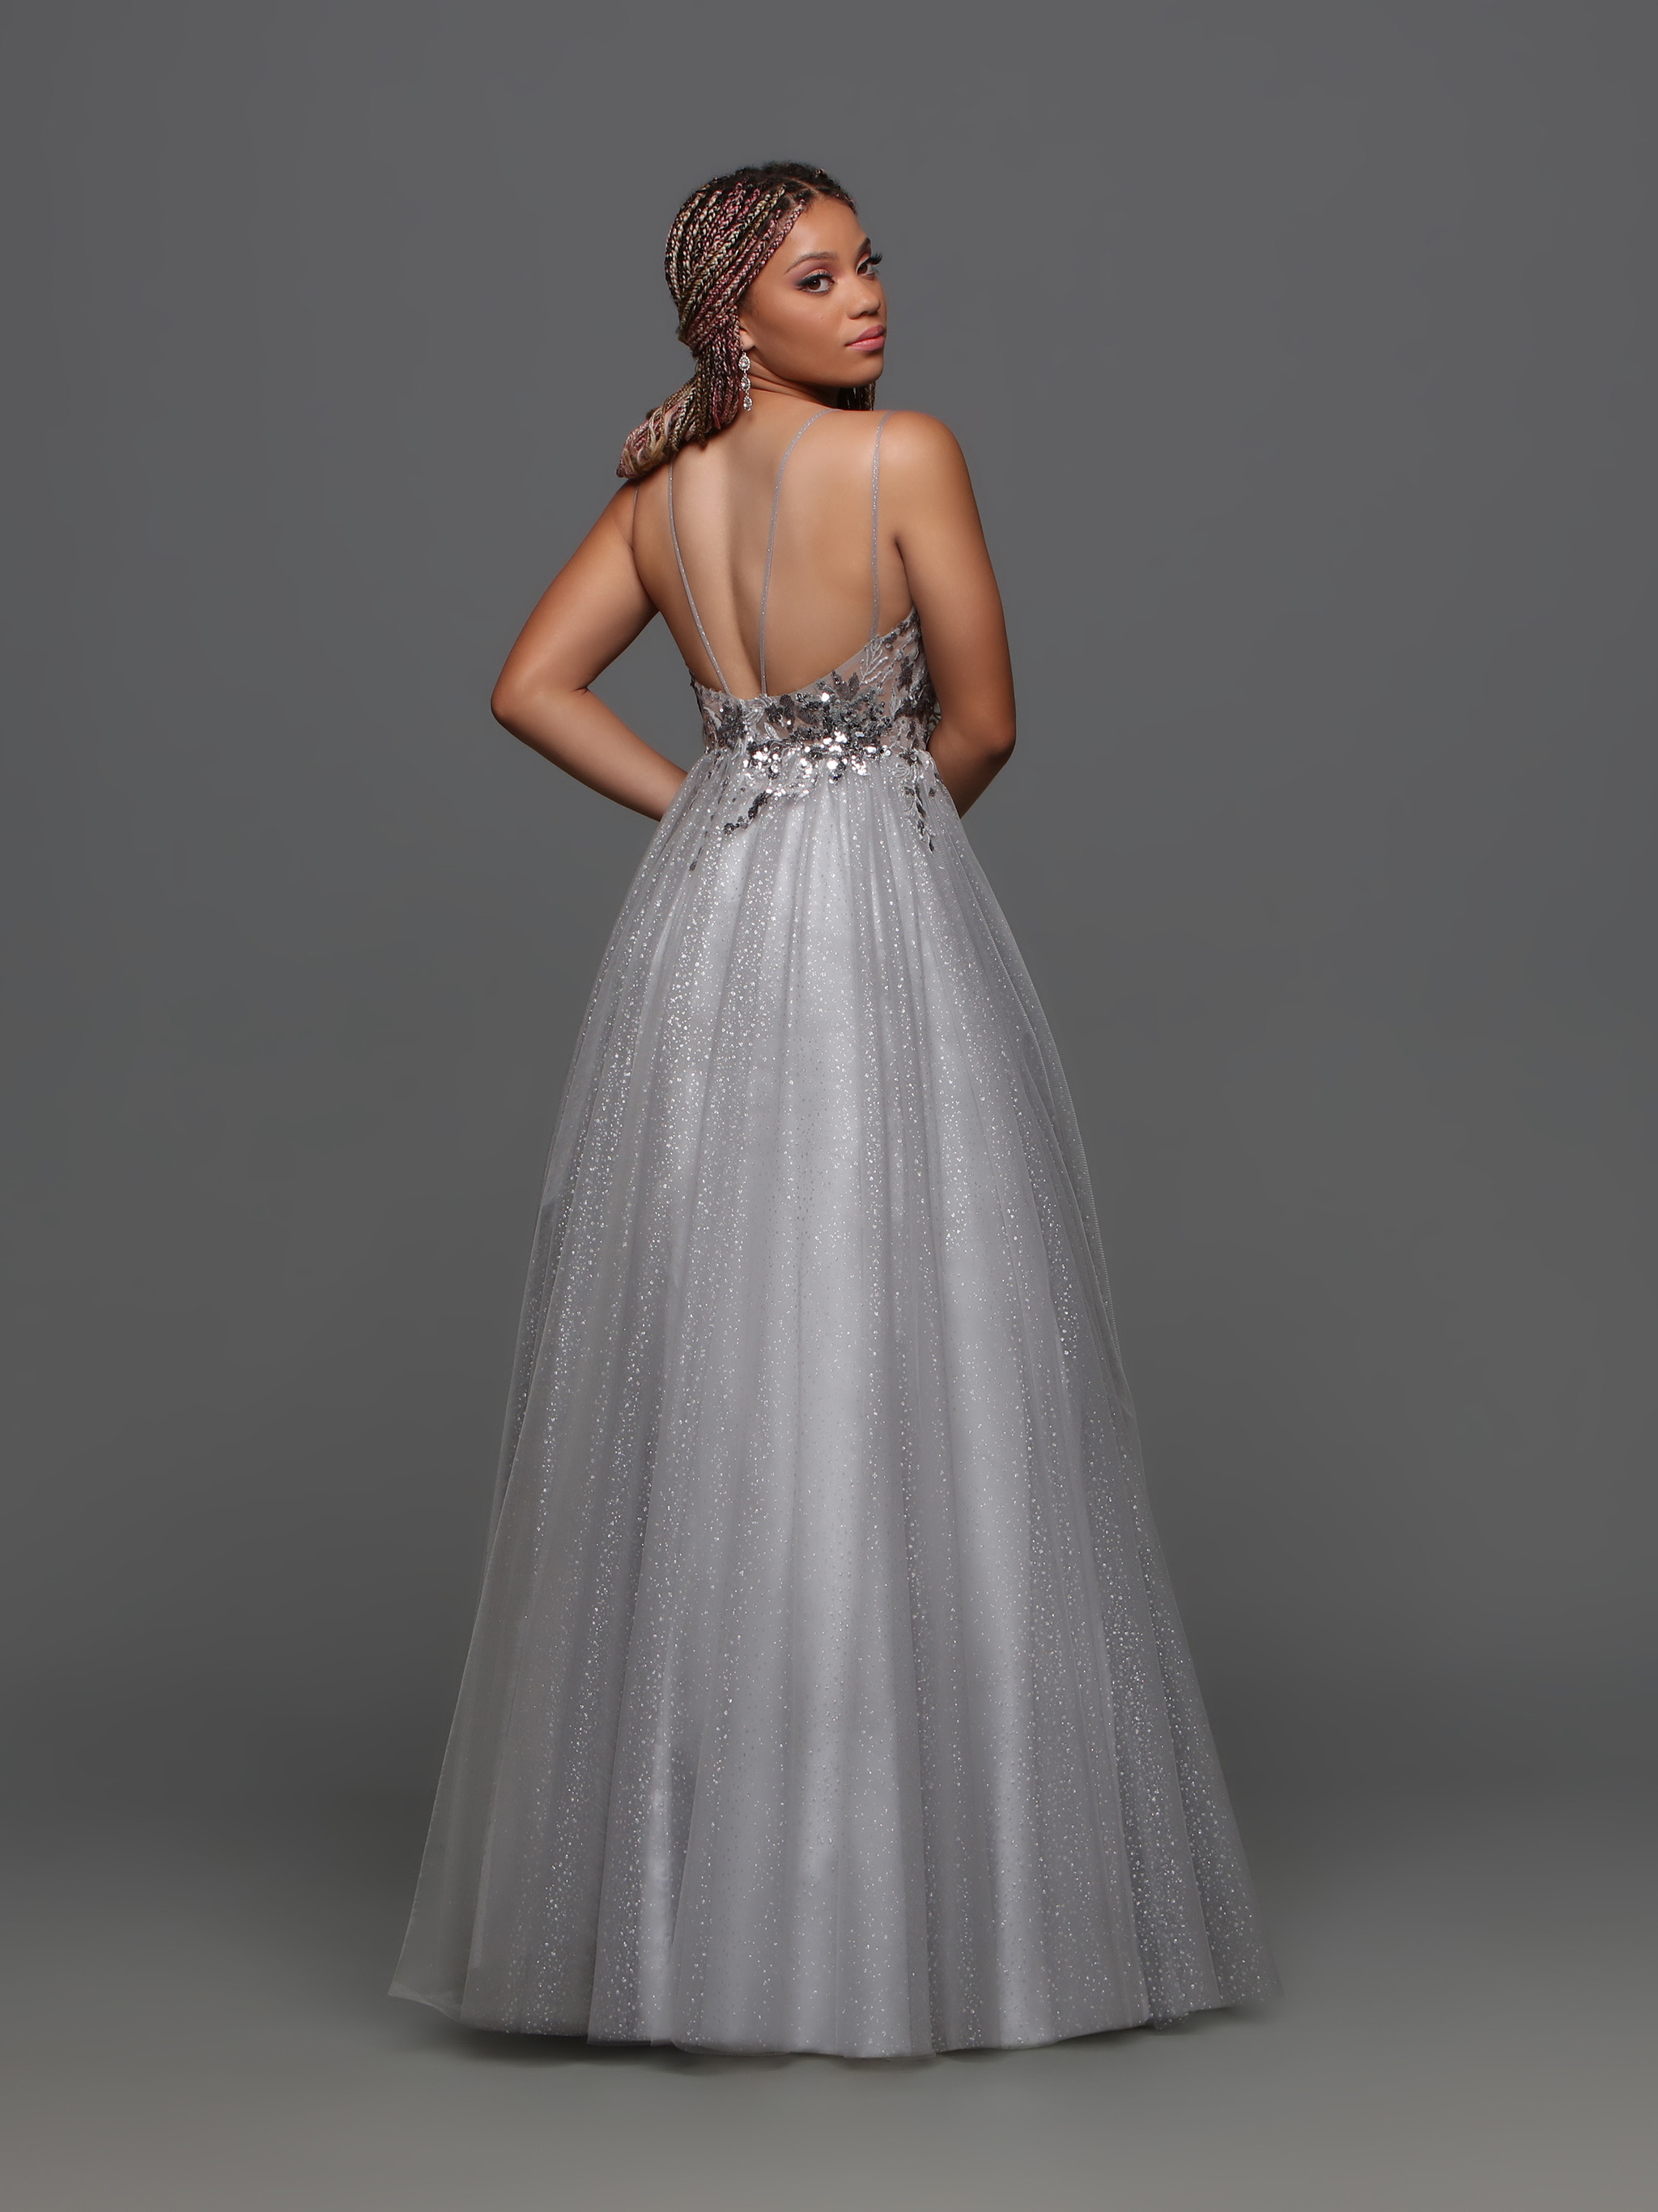 Image showing back view of style #72397